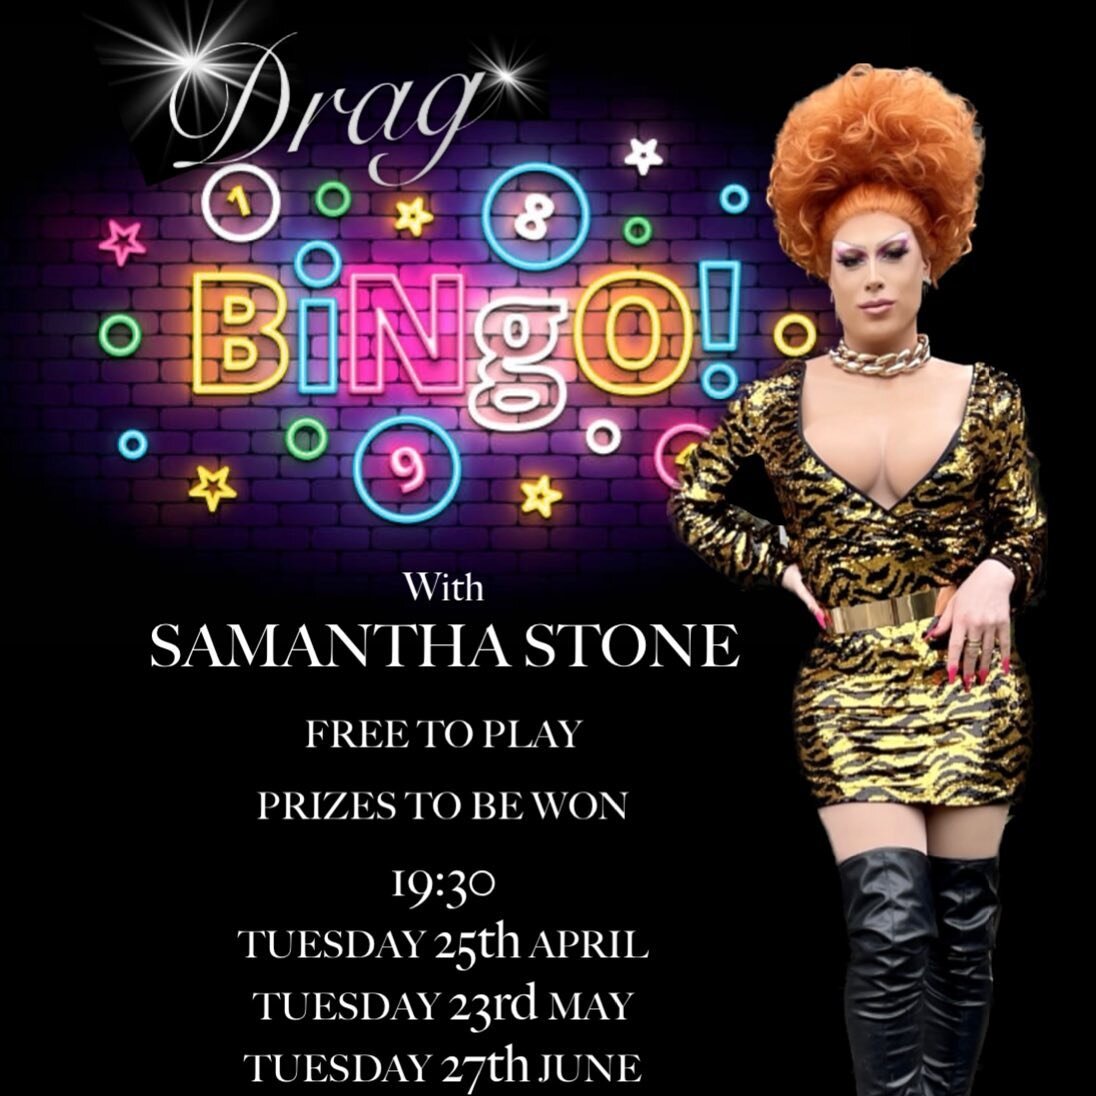 It&rsquo;s less than 2 weeks till our first Drag Bingo night with @samanthaxstone 🤩
It&rsquo;s set to be a great night&hellip; who&rsquo;s coming? 👀